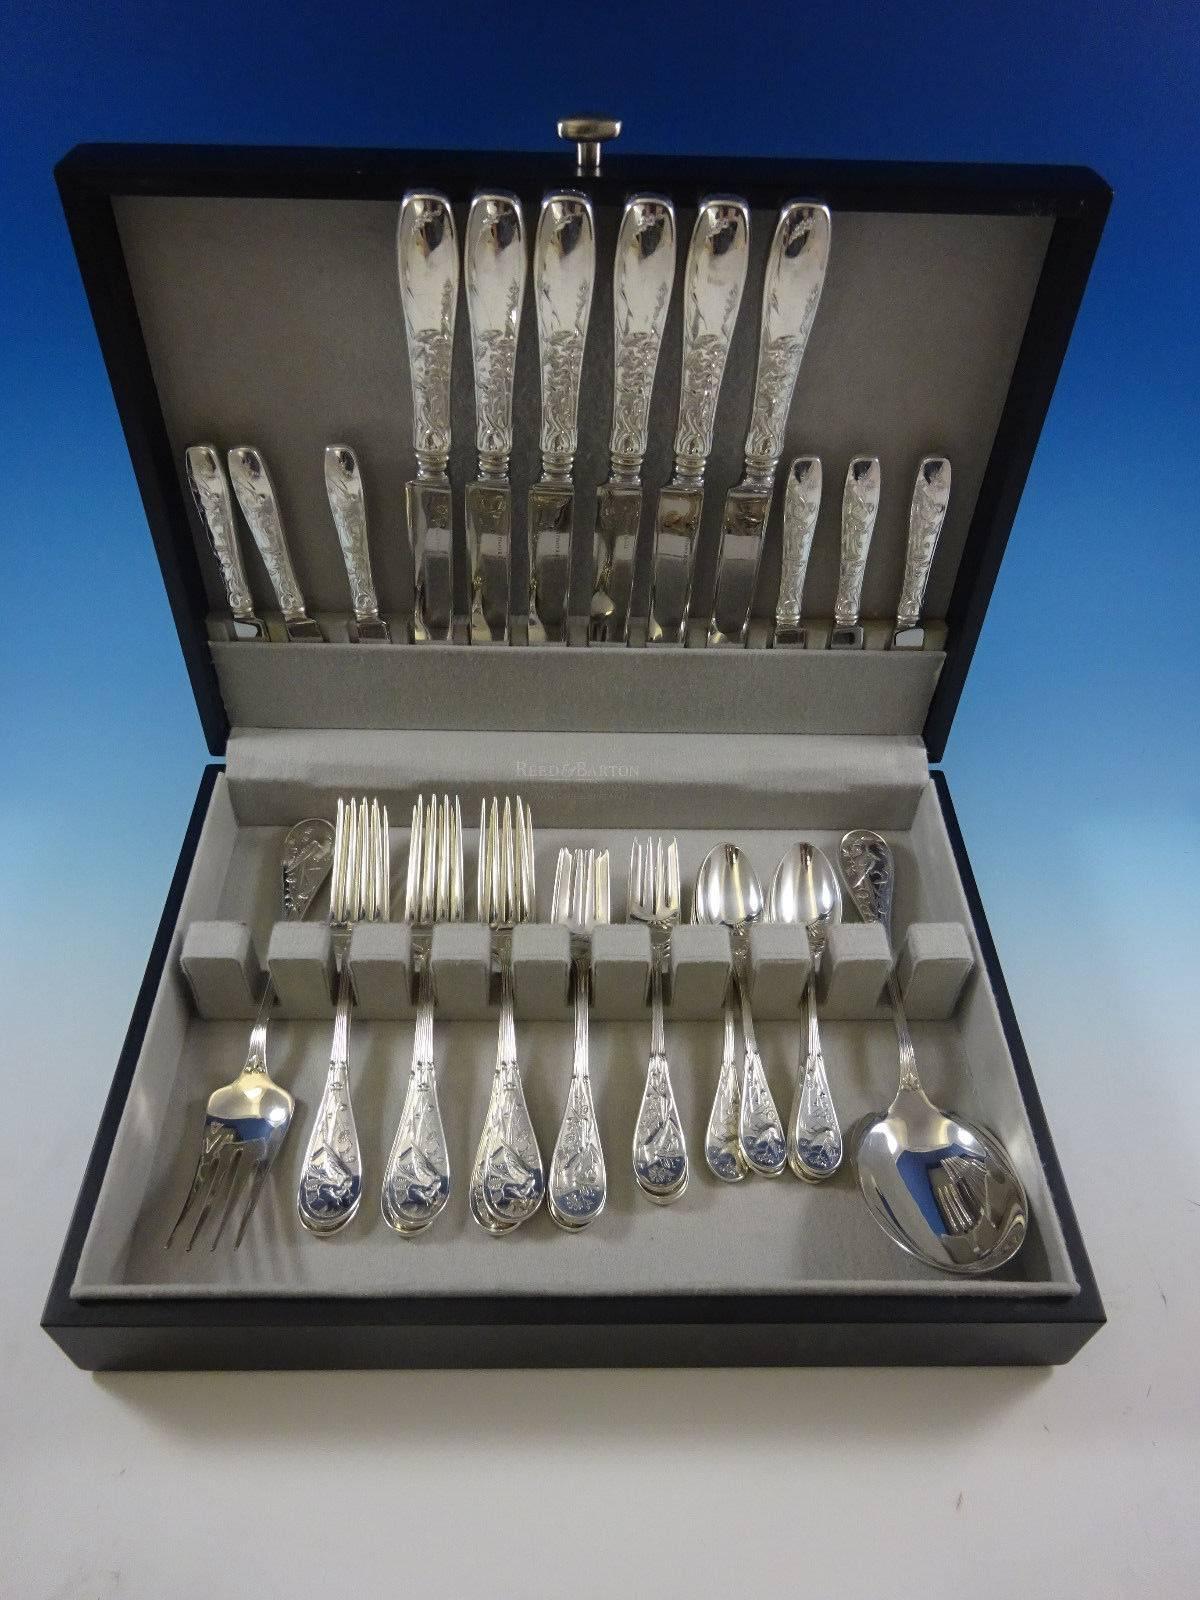 Audubon by Tiffany & Co. sterling silver dinner size flatware set, 32 pieces. Great starter set! 

This set includes:

Six dinner size knives, 10 1/8